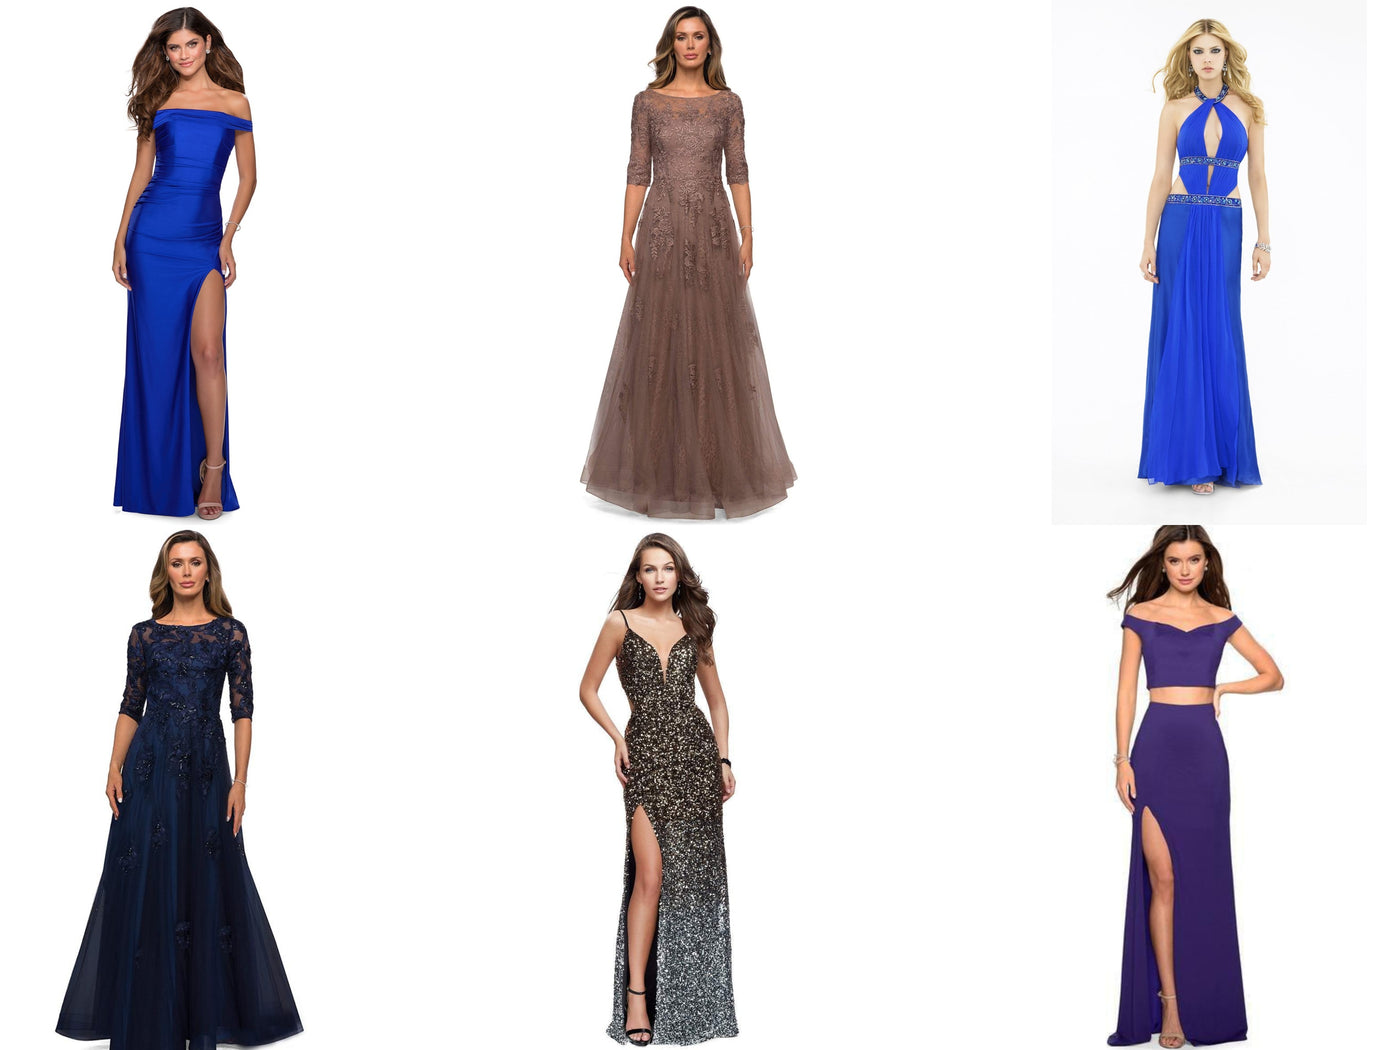 How To Dress Like A Celebrity With La Femme Dresses In Your Budget